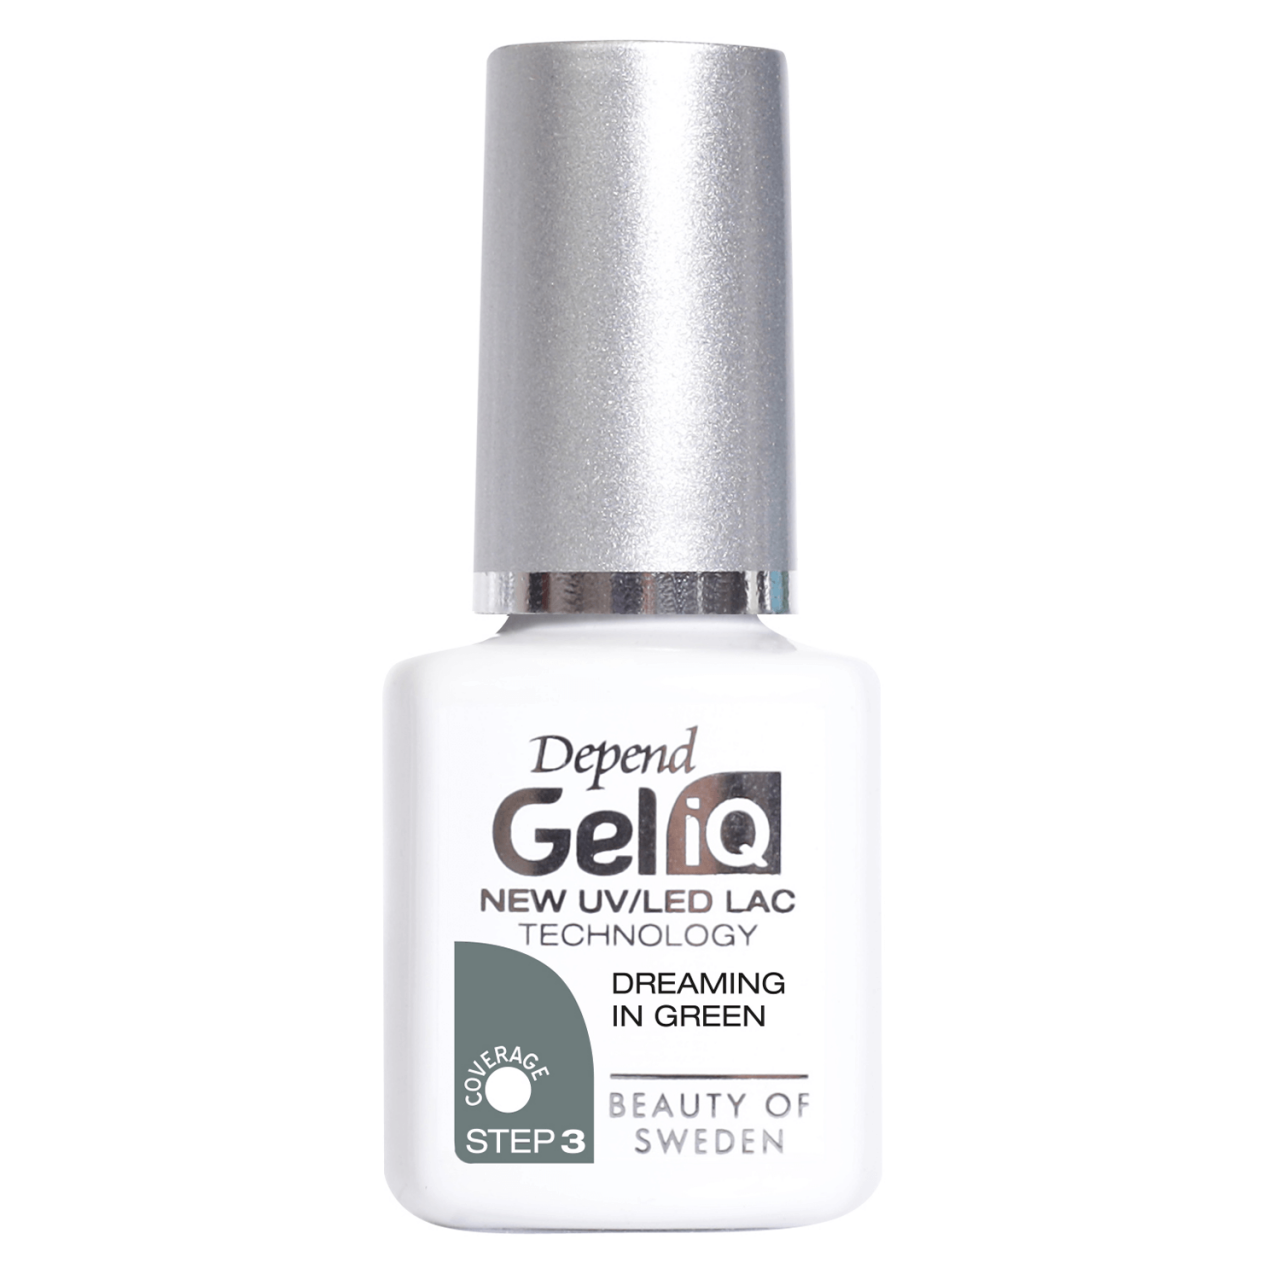 Gel iQ Color - Dreaming in Green von DEPEND Beauty of Sweden